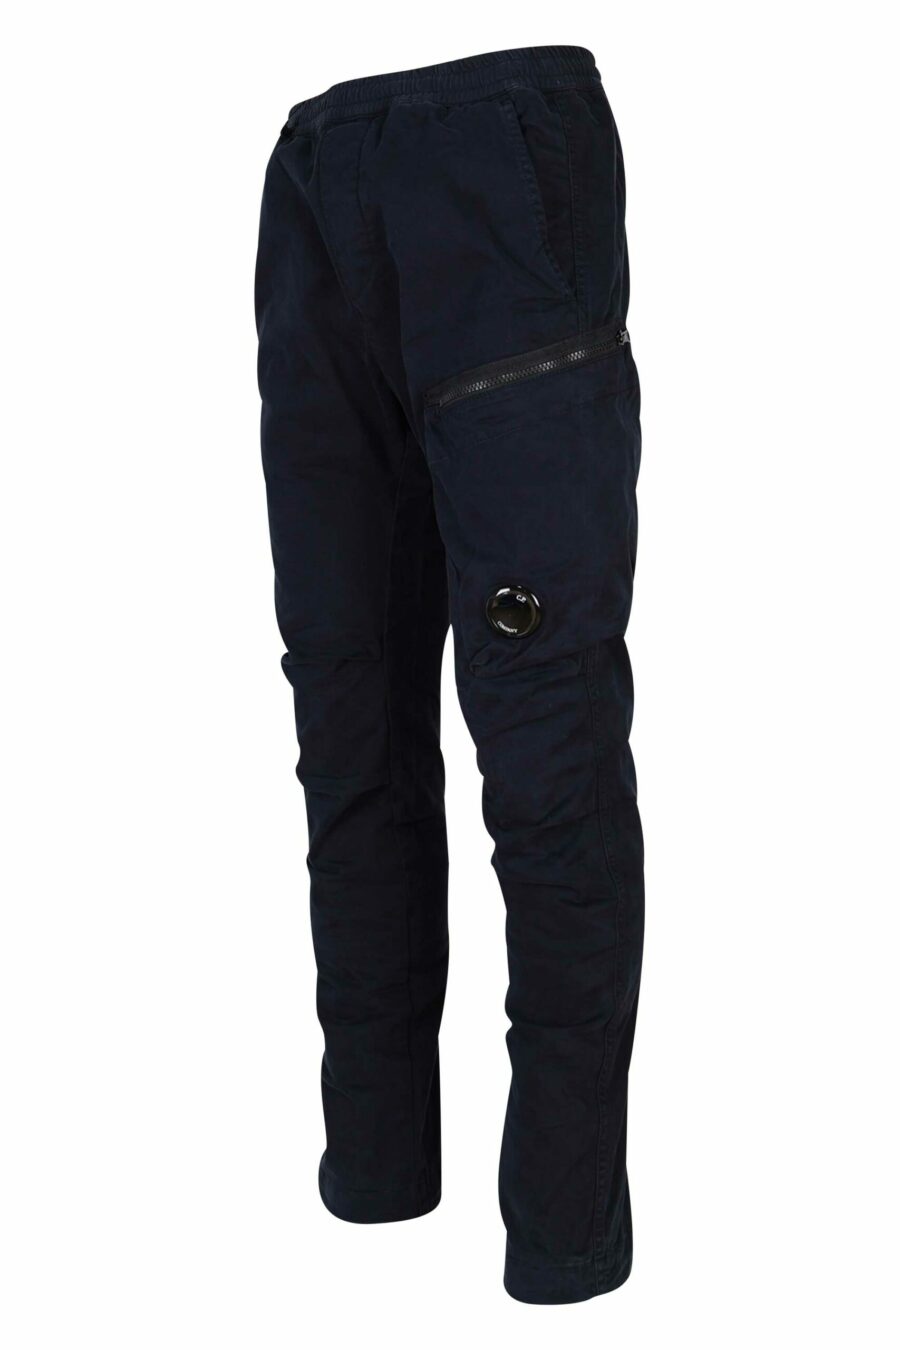 Dark blue stretch satin trousers with side pocket and logo lens - 7620943578485 1 1 scaled